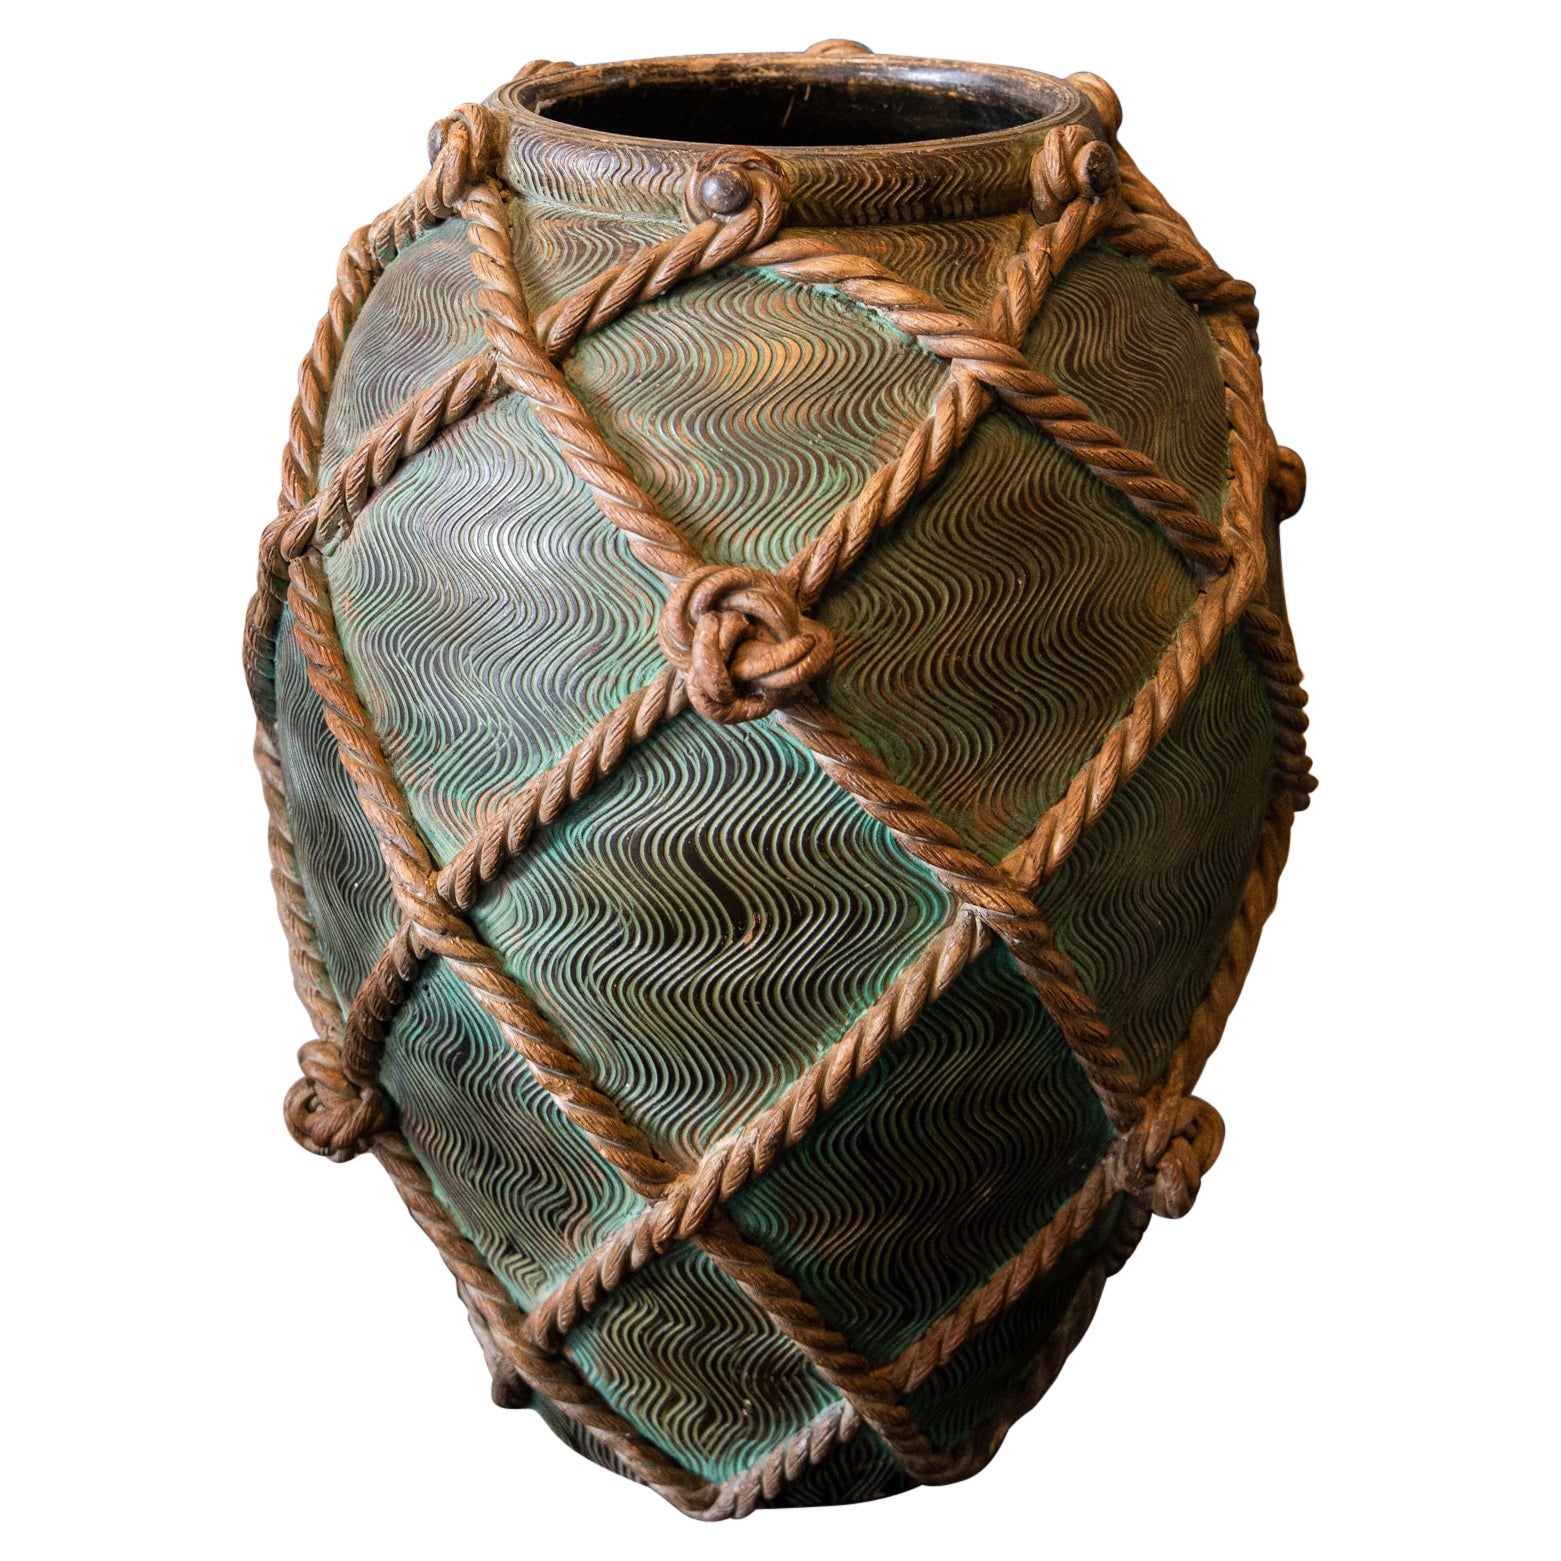 A twisted rope ceramic urn by Ugo Zaccagnini - Firenze 1930s, signed For  Sale at 1stDibs